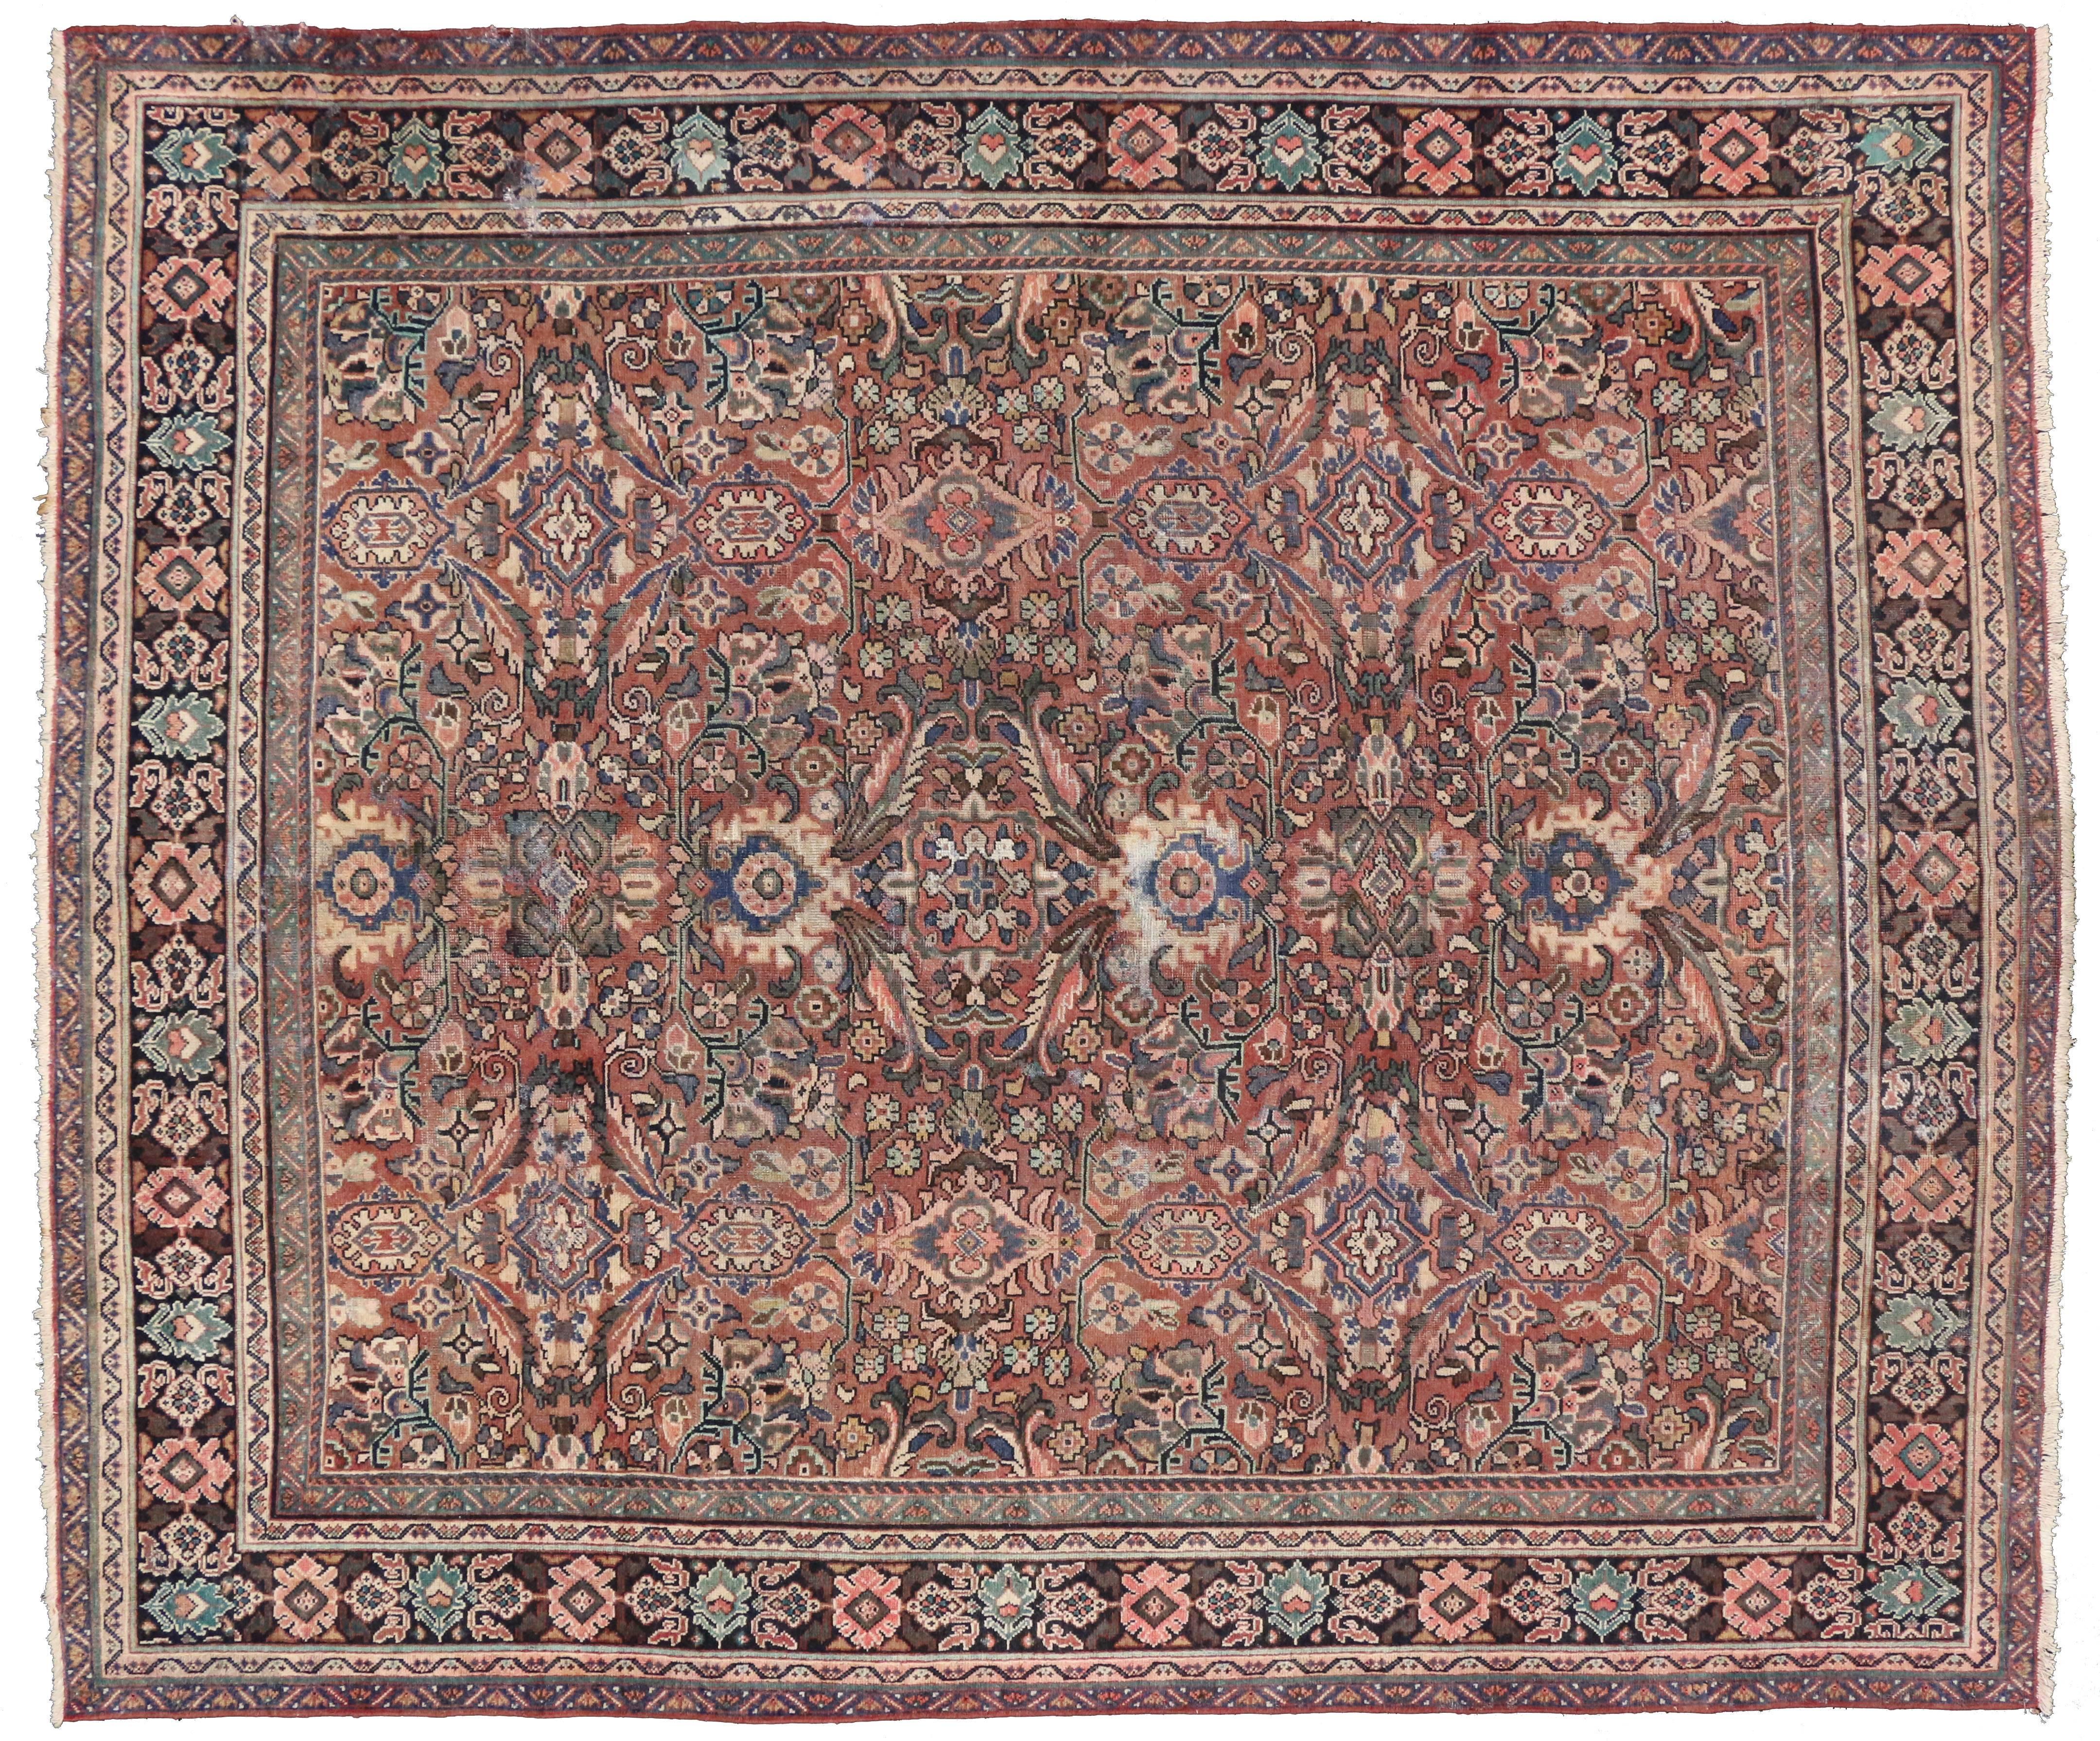 Antique-Worn Persian Mahal Rug, Relaxed Refinement Meets Earth-Tone Elegance 4